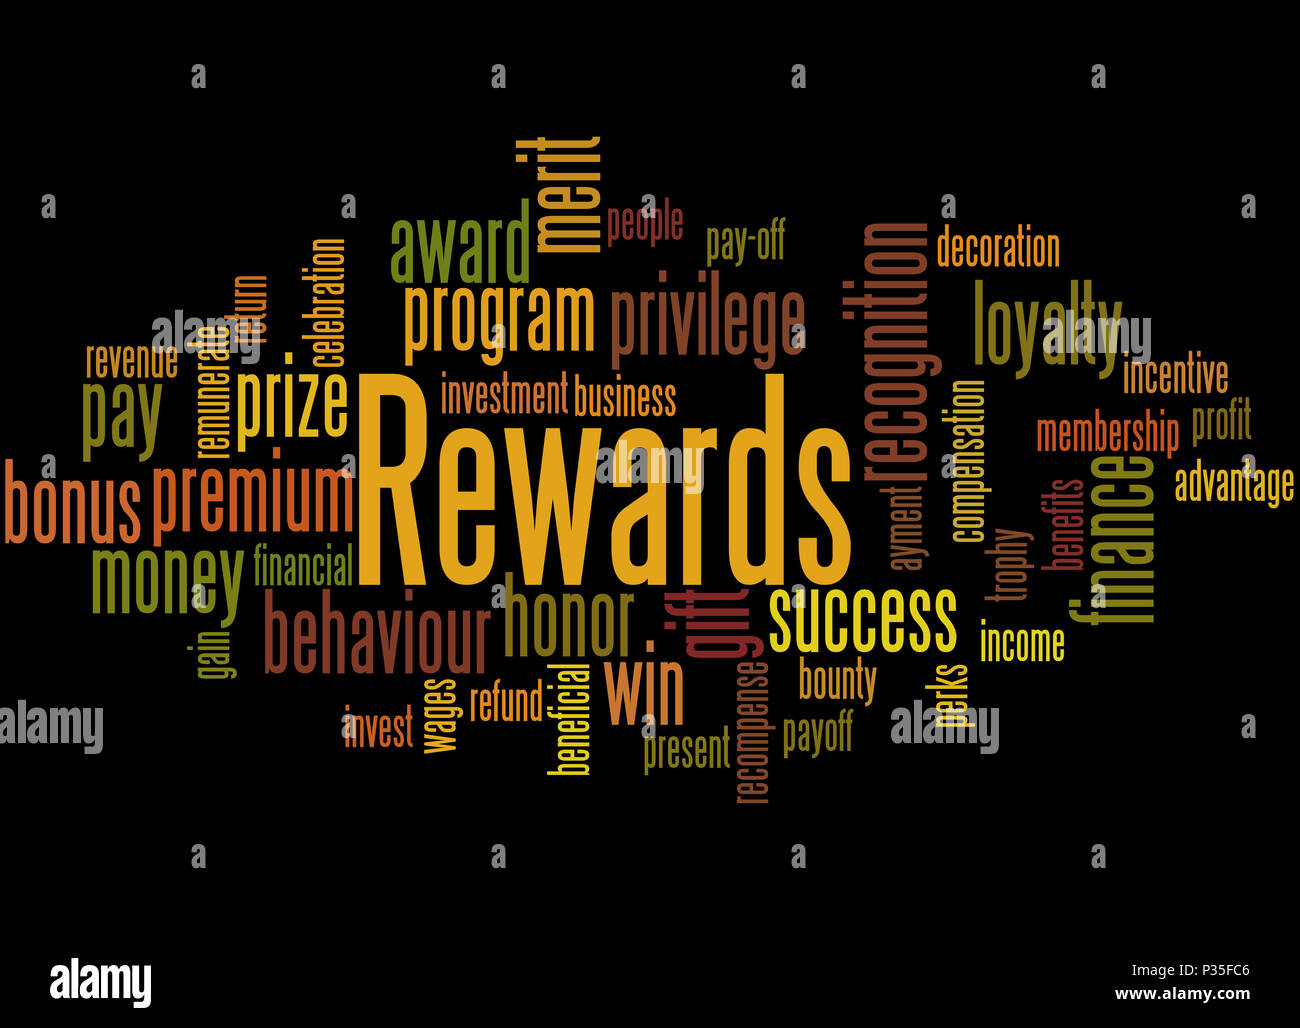 rewards and recognition background